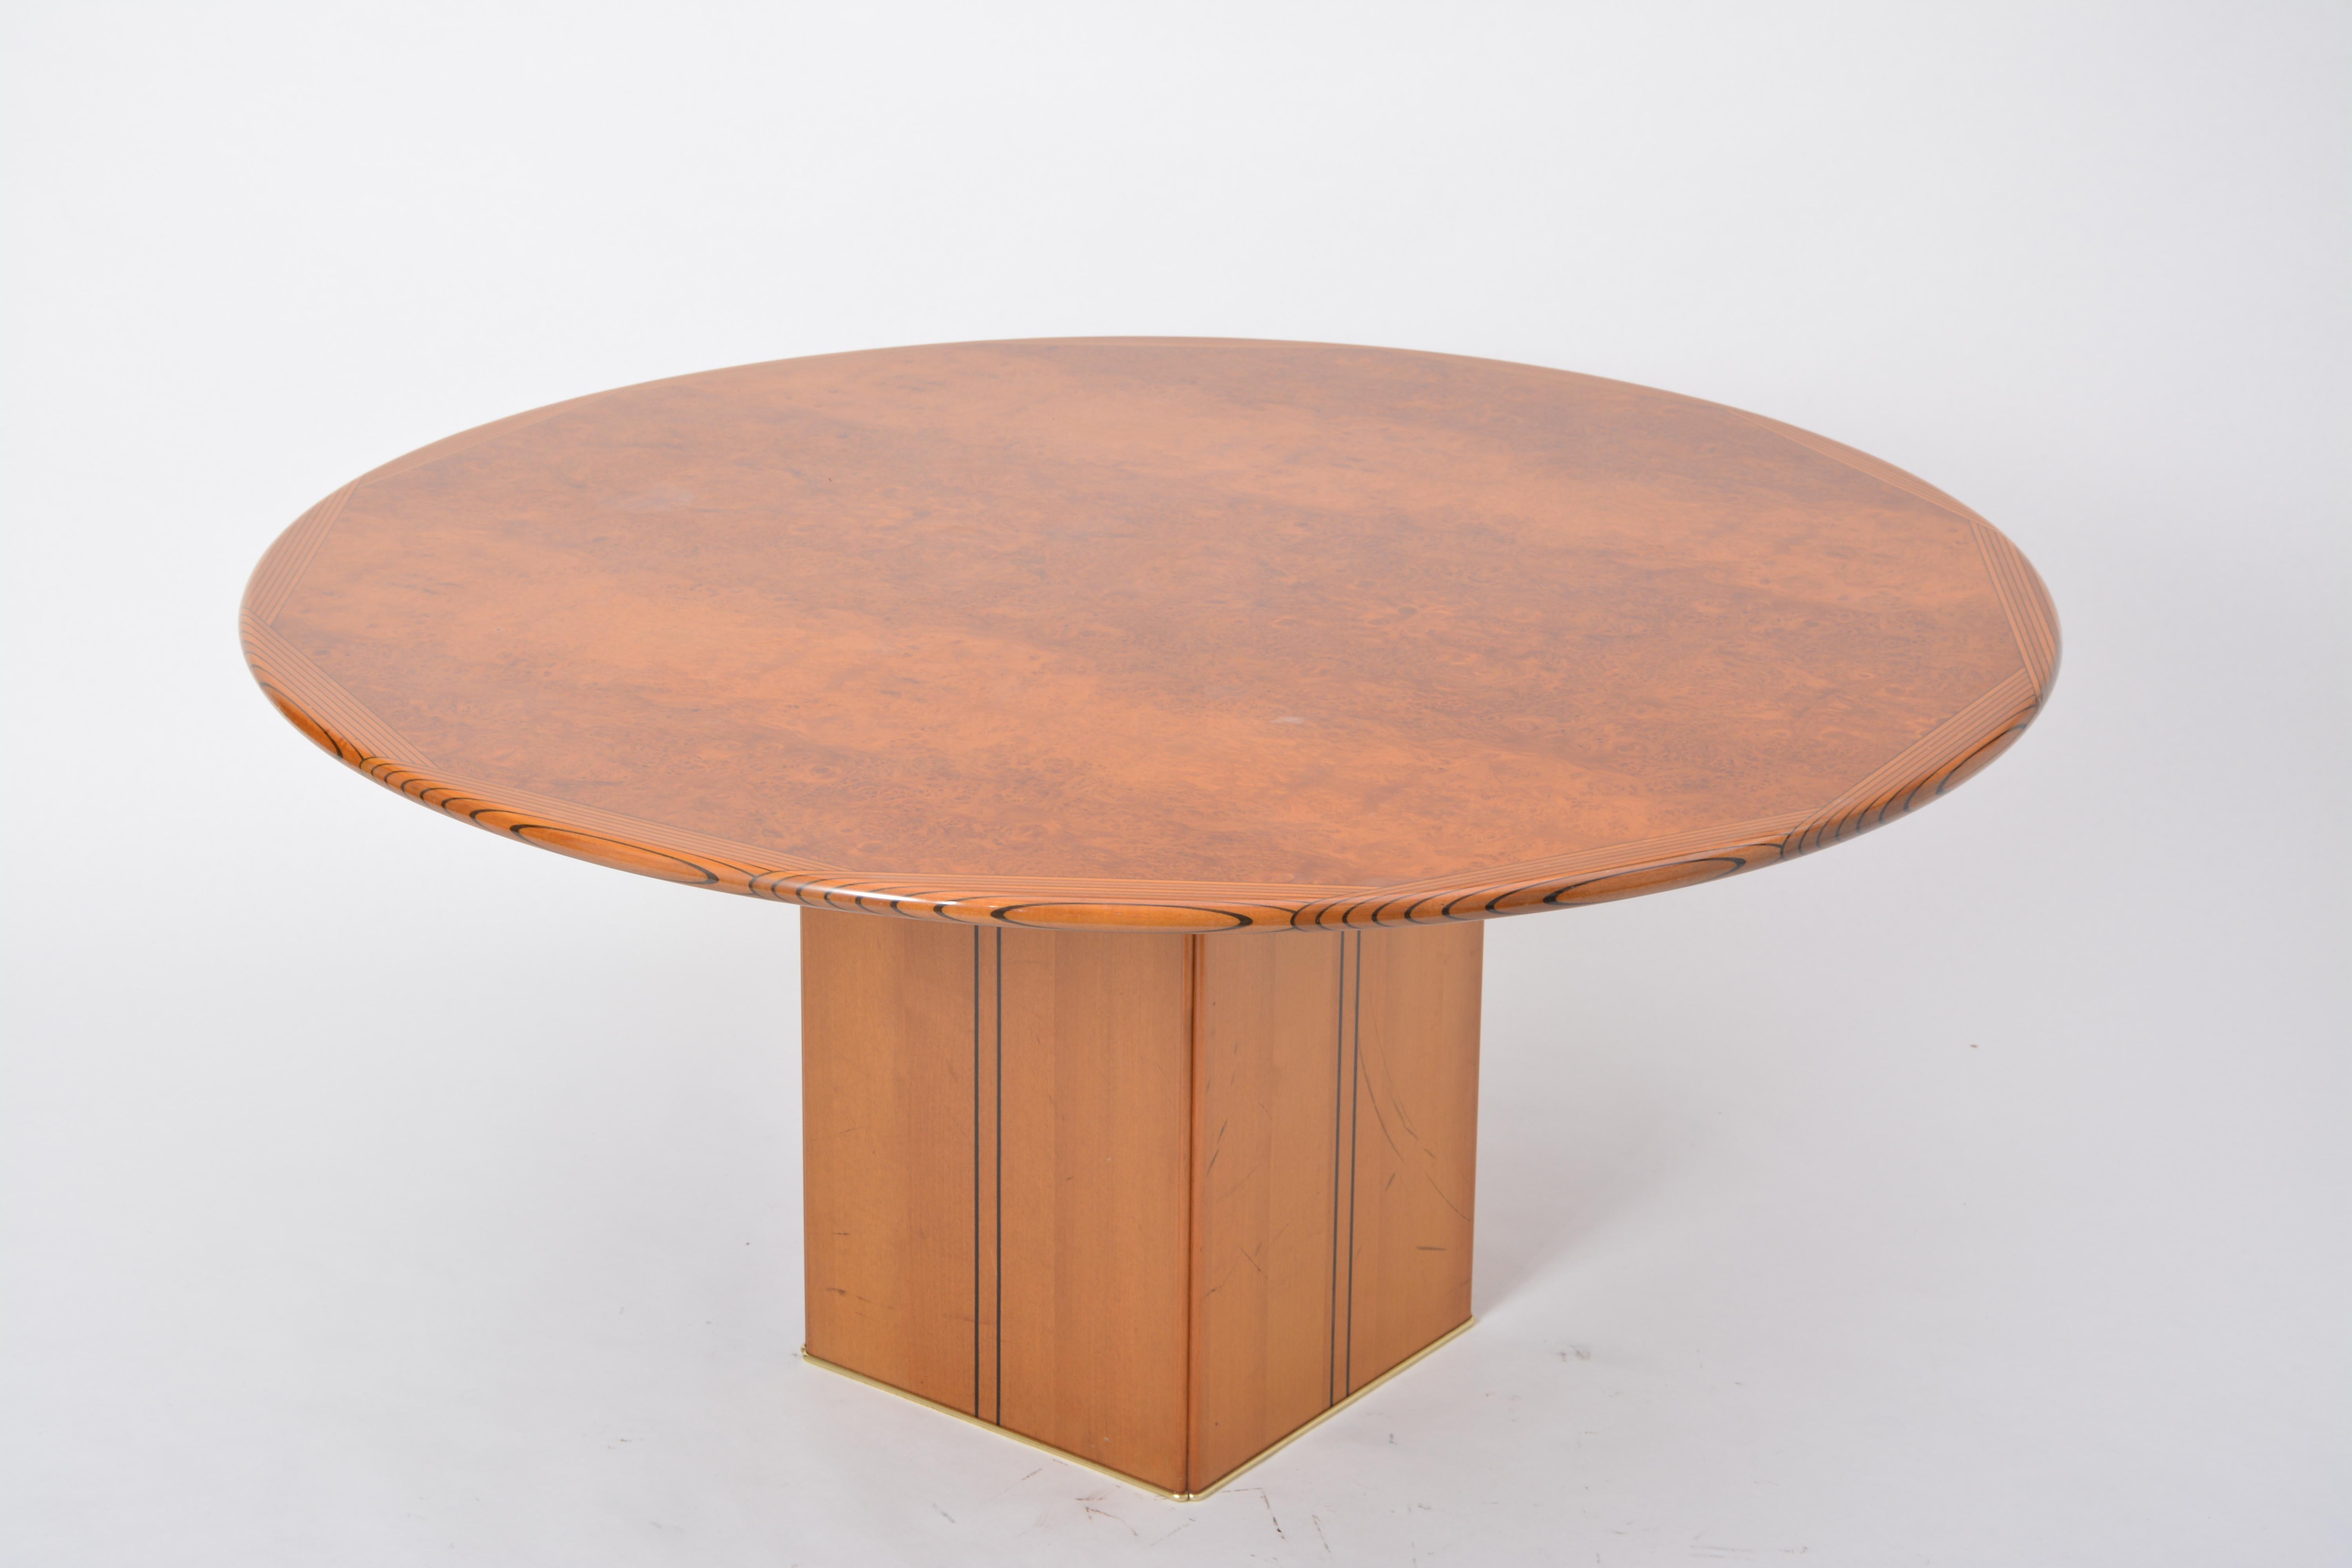 This dining table was designed in 1975 by Afra & Tobia Scarpa for Maxalto a division of B & B Italia. The tabletop is made of burl wood and features walnut with ebony inlay on the edges.
 